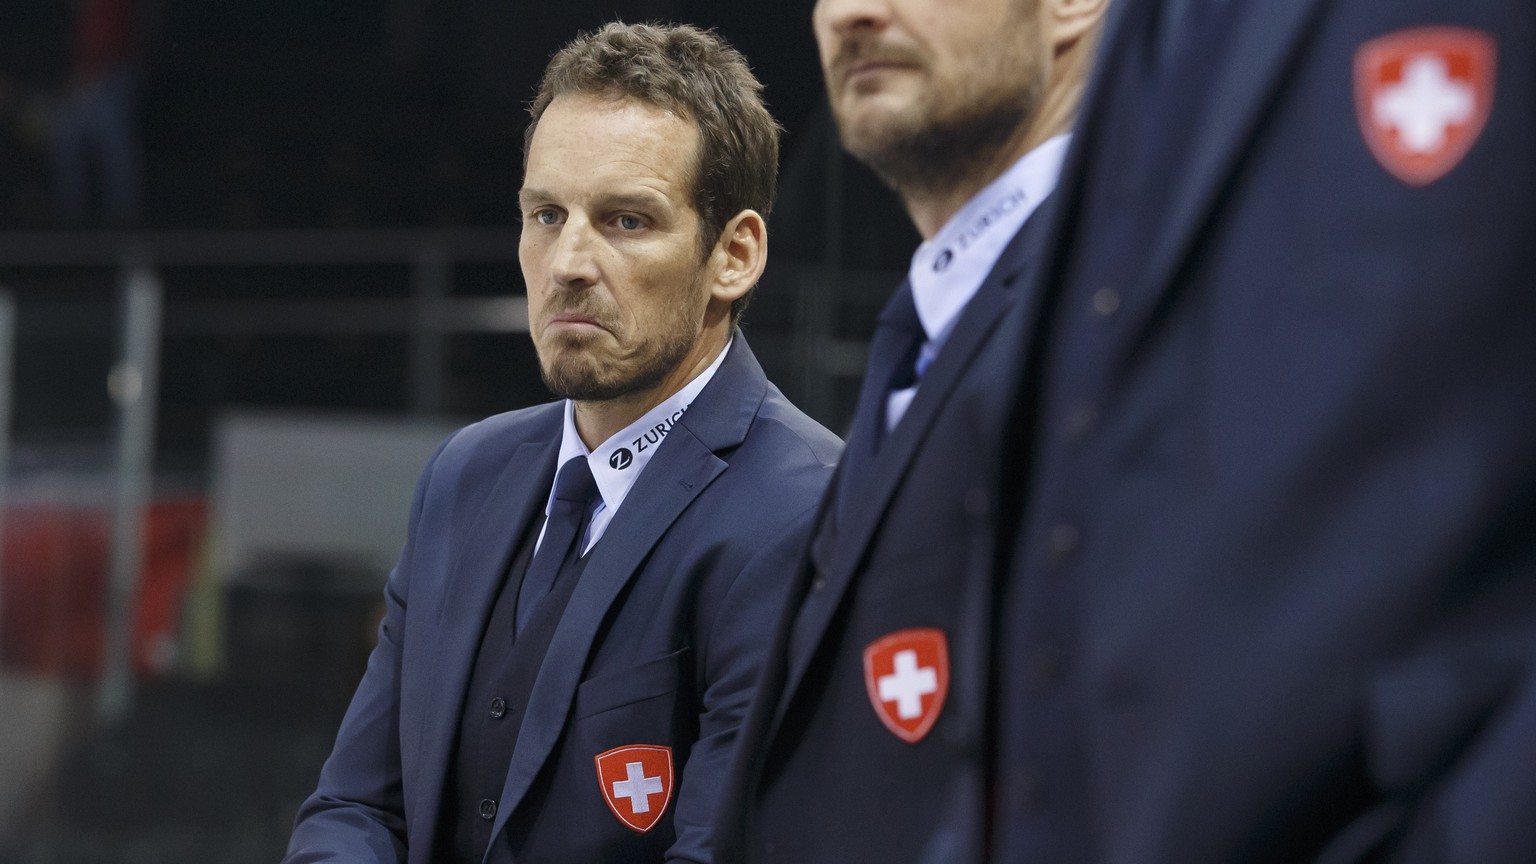 Patrick Fischer, head coach of Switzerland national ice hockey team, reacts, right, during a friendly international ice hockey game between Switzerland and France, at the ice stadium Les Vernets, in G ...